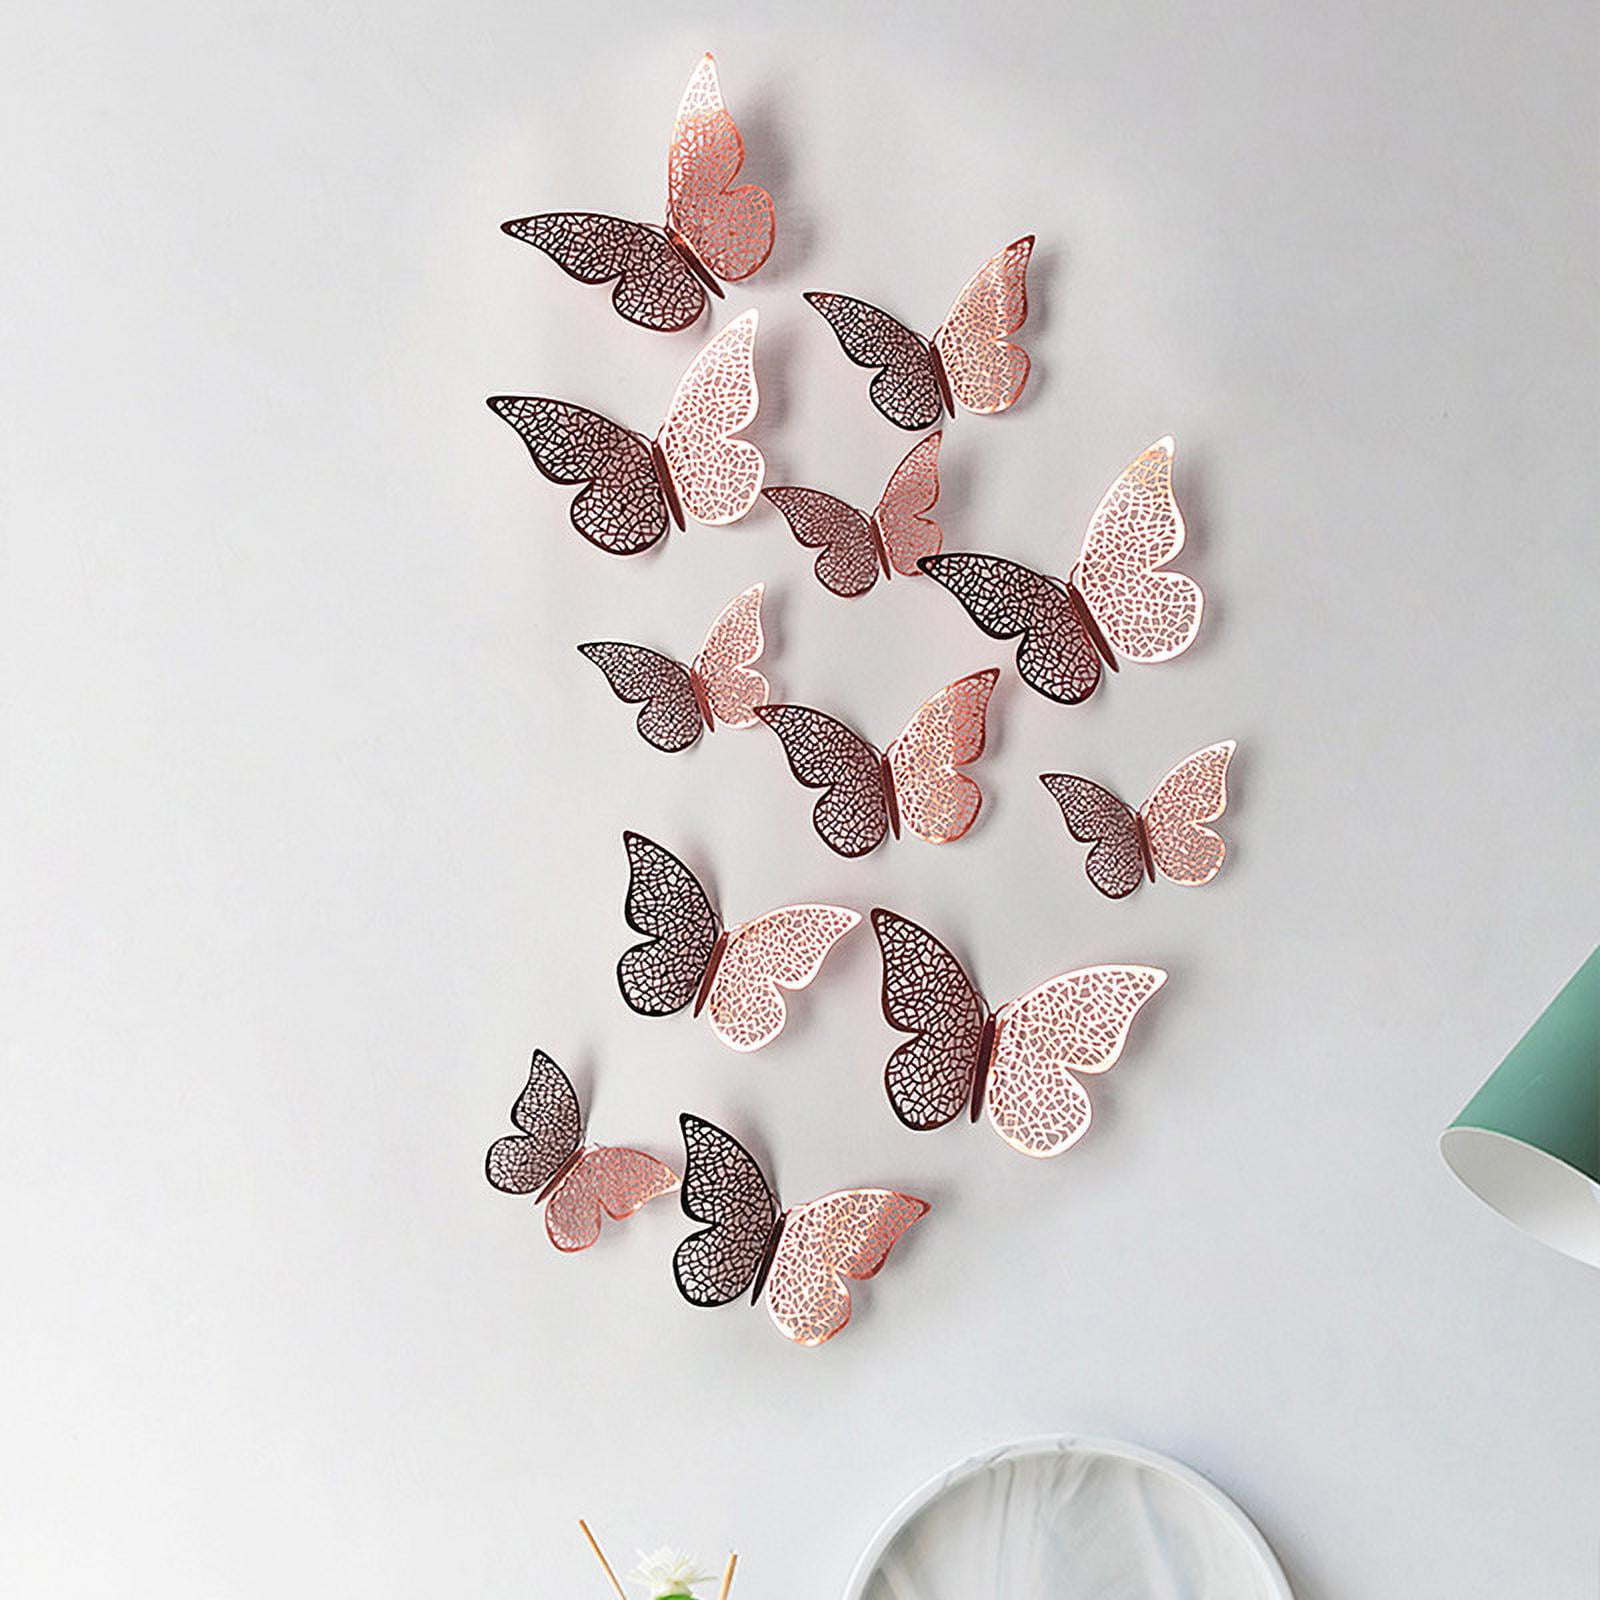 3D Metallic Decals DIY Decorative Paper Murals Removable Art Decoration Stickers for Kids Girls Gift Bedroom Home Wedding Party Nursery Classroom Decor-Rose Gold 36 Pcs Butterfly Wall Stickers 